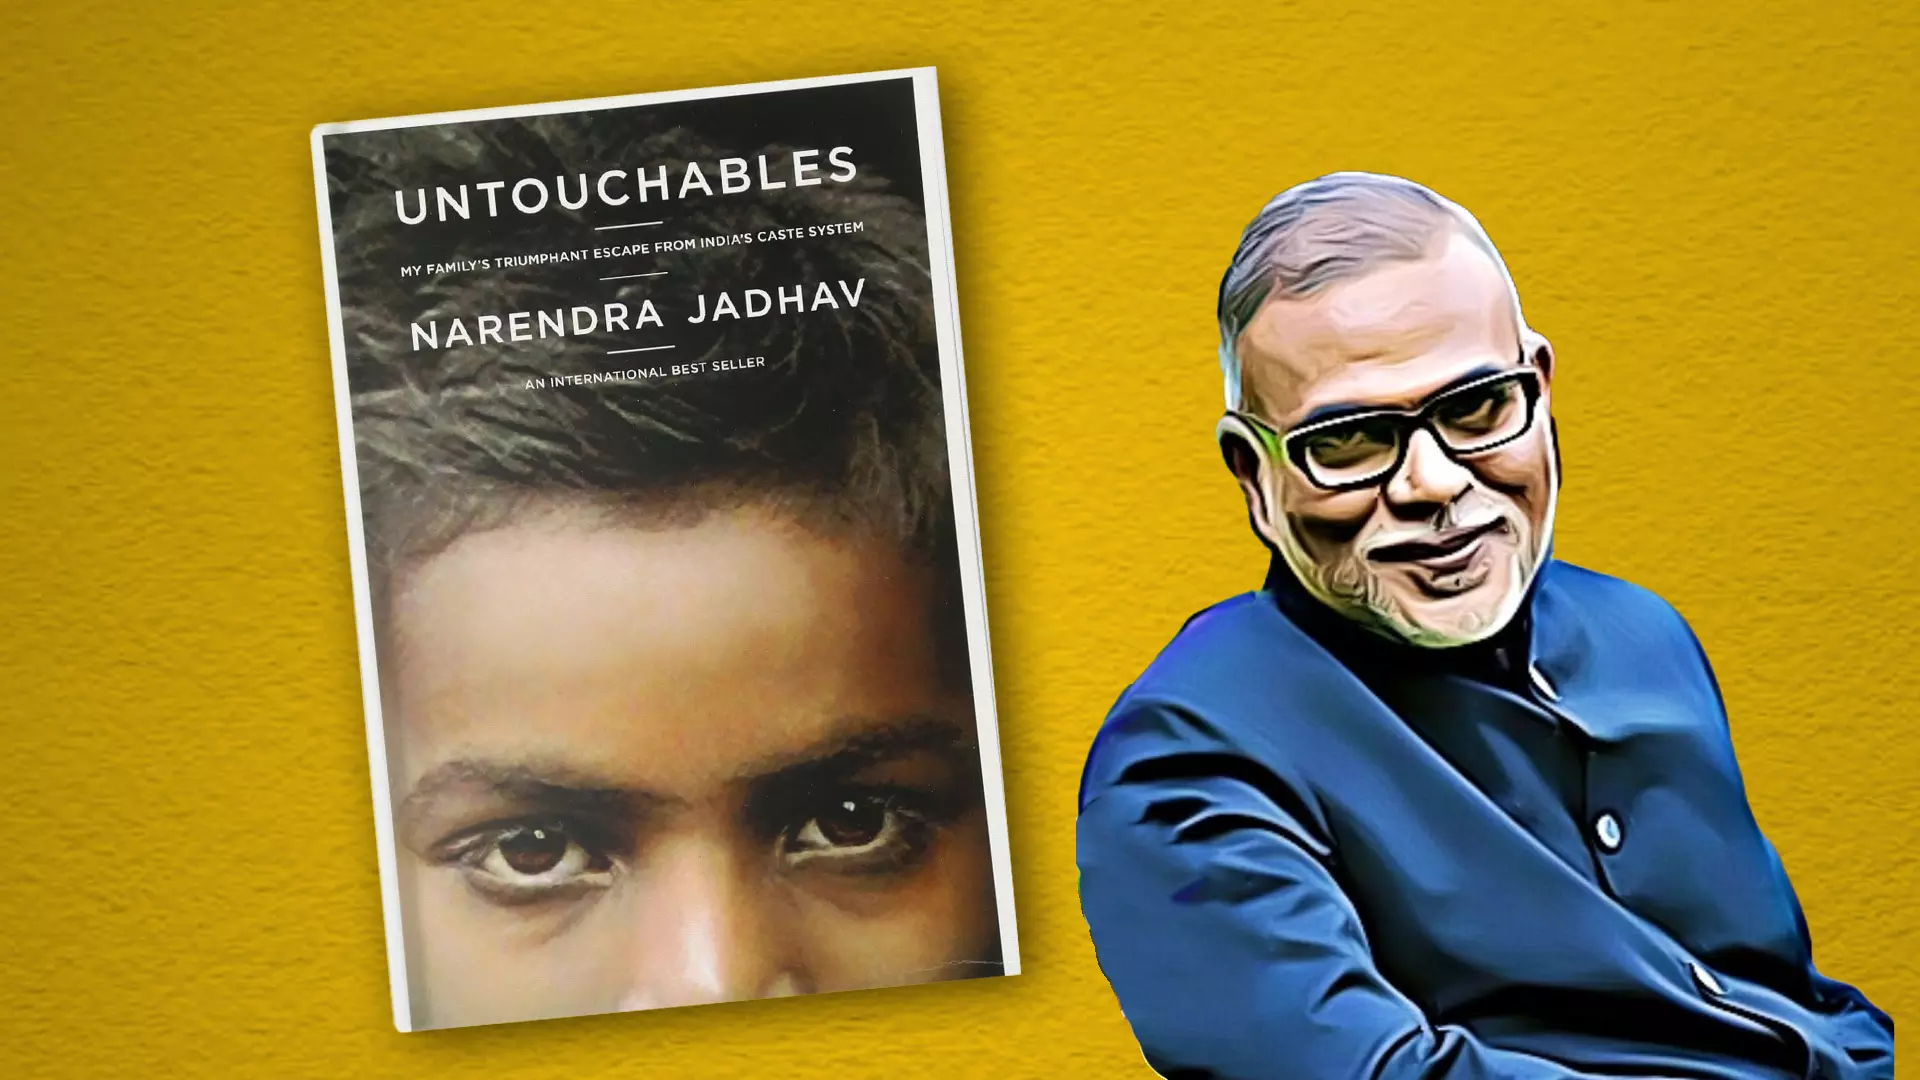 Untouchables: My Family’s Triumphant Journey Out of the Caste System in Modern India, written by Narendra Jadhav, tells the story of his father’s rebellion against caste system.